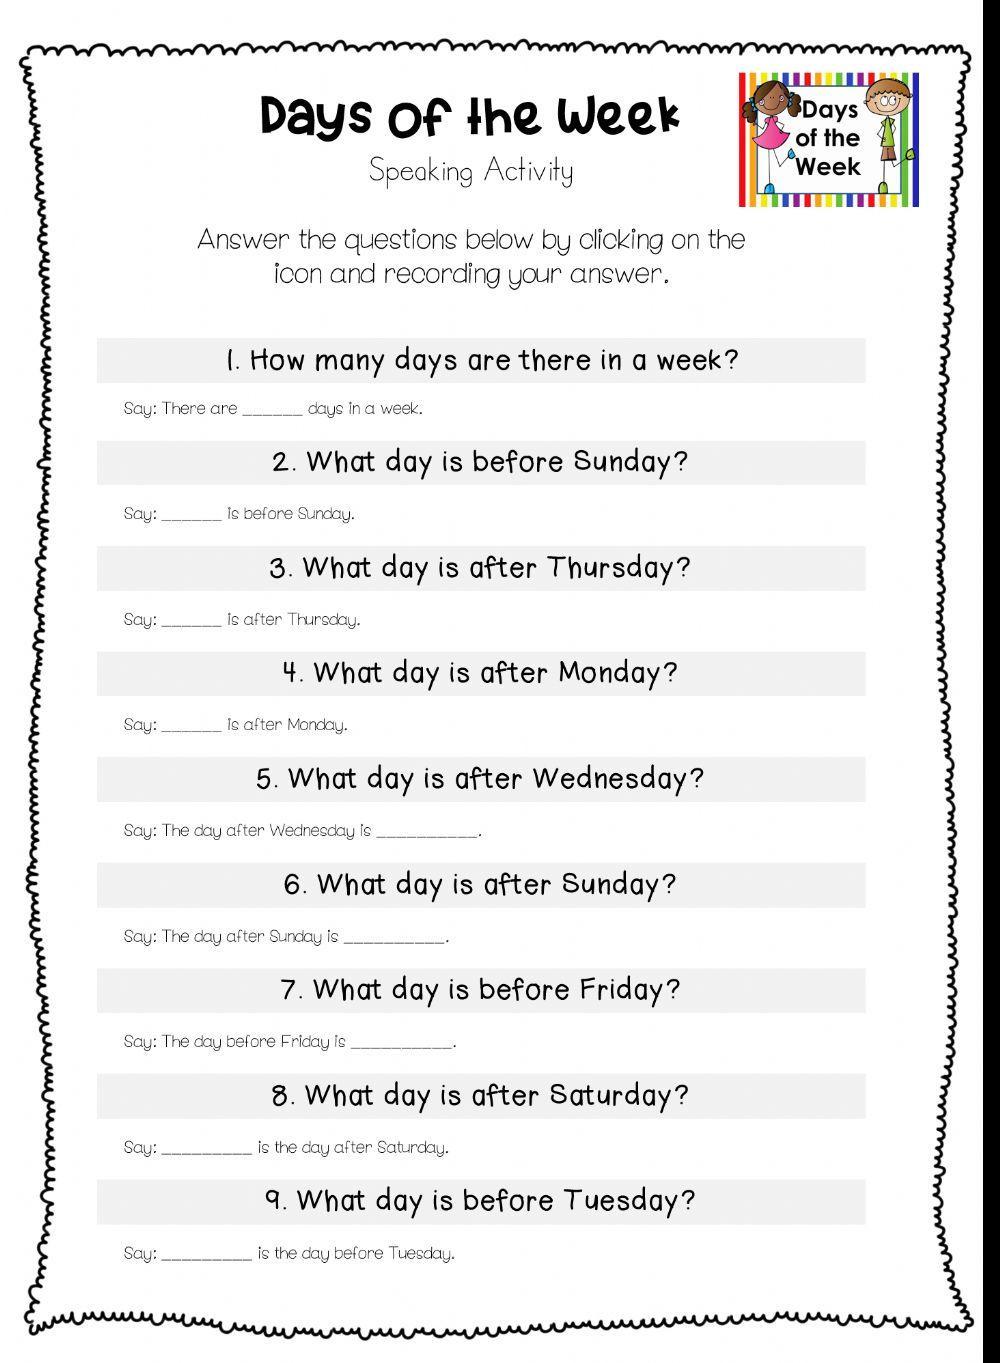 Days of the Week - Speaking Activity